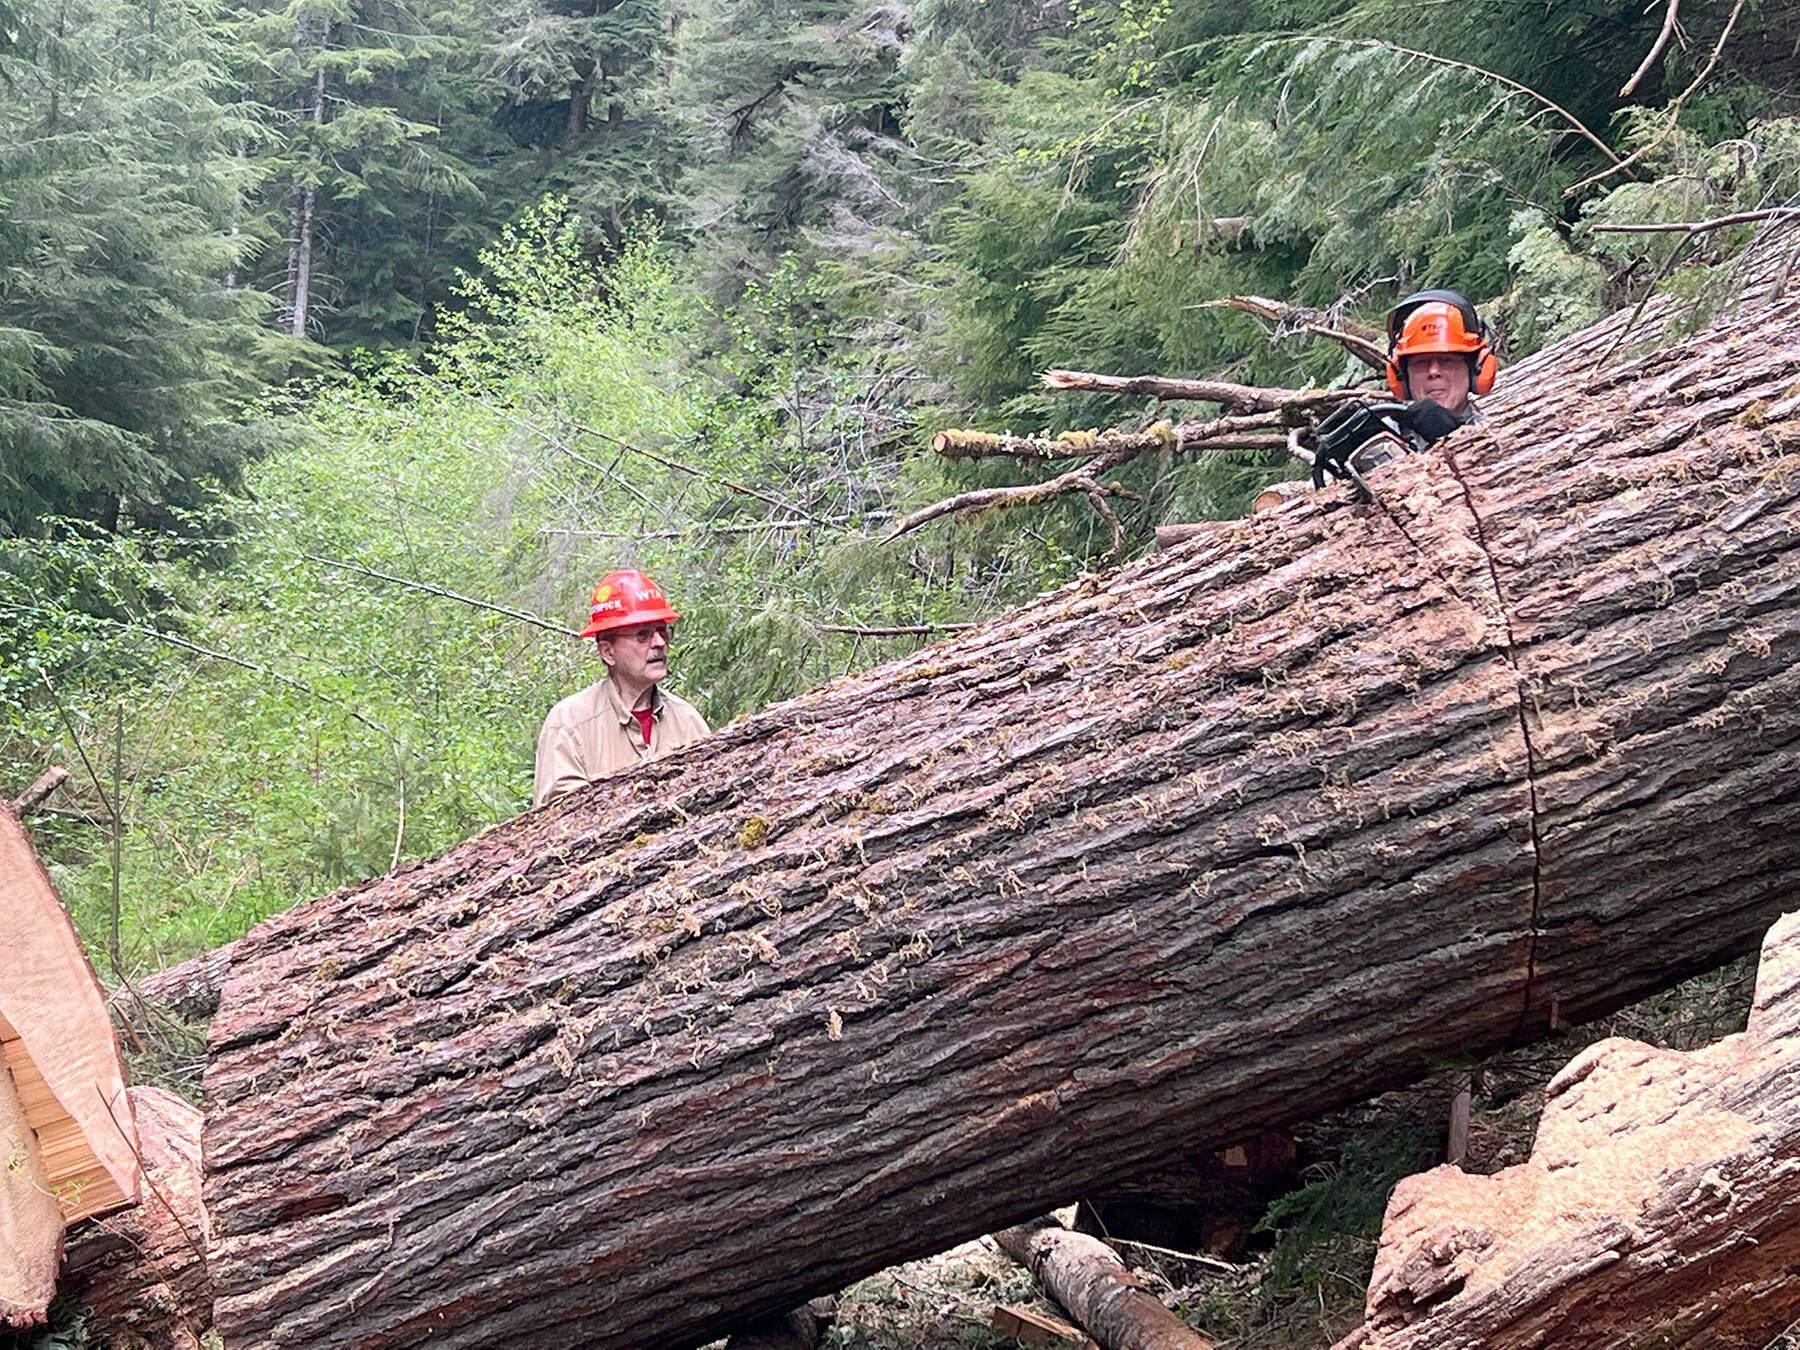 Washington Trail Association certified sawyer Paul “Toothpick” Hornberger watches as Bernt Ericsen makes one of several cuts to help move a massive log off an Olympic National Forest Service trail near LaBar Horse Camp. (Photo courtesy Bob Hoyle)